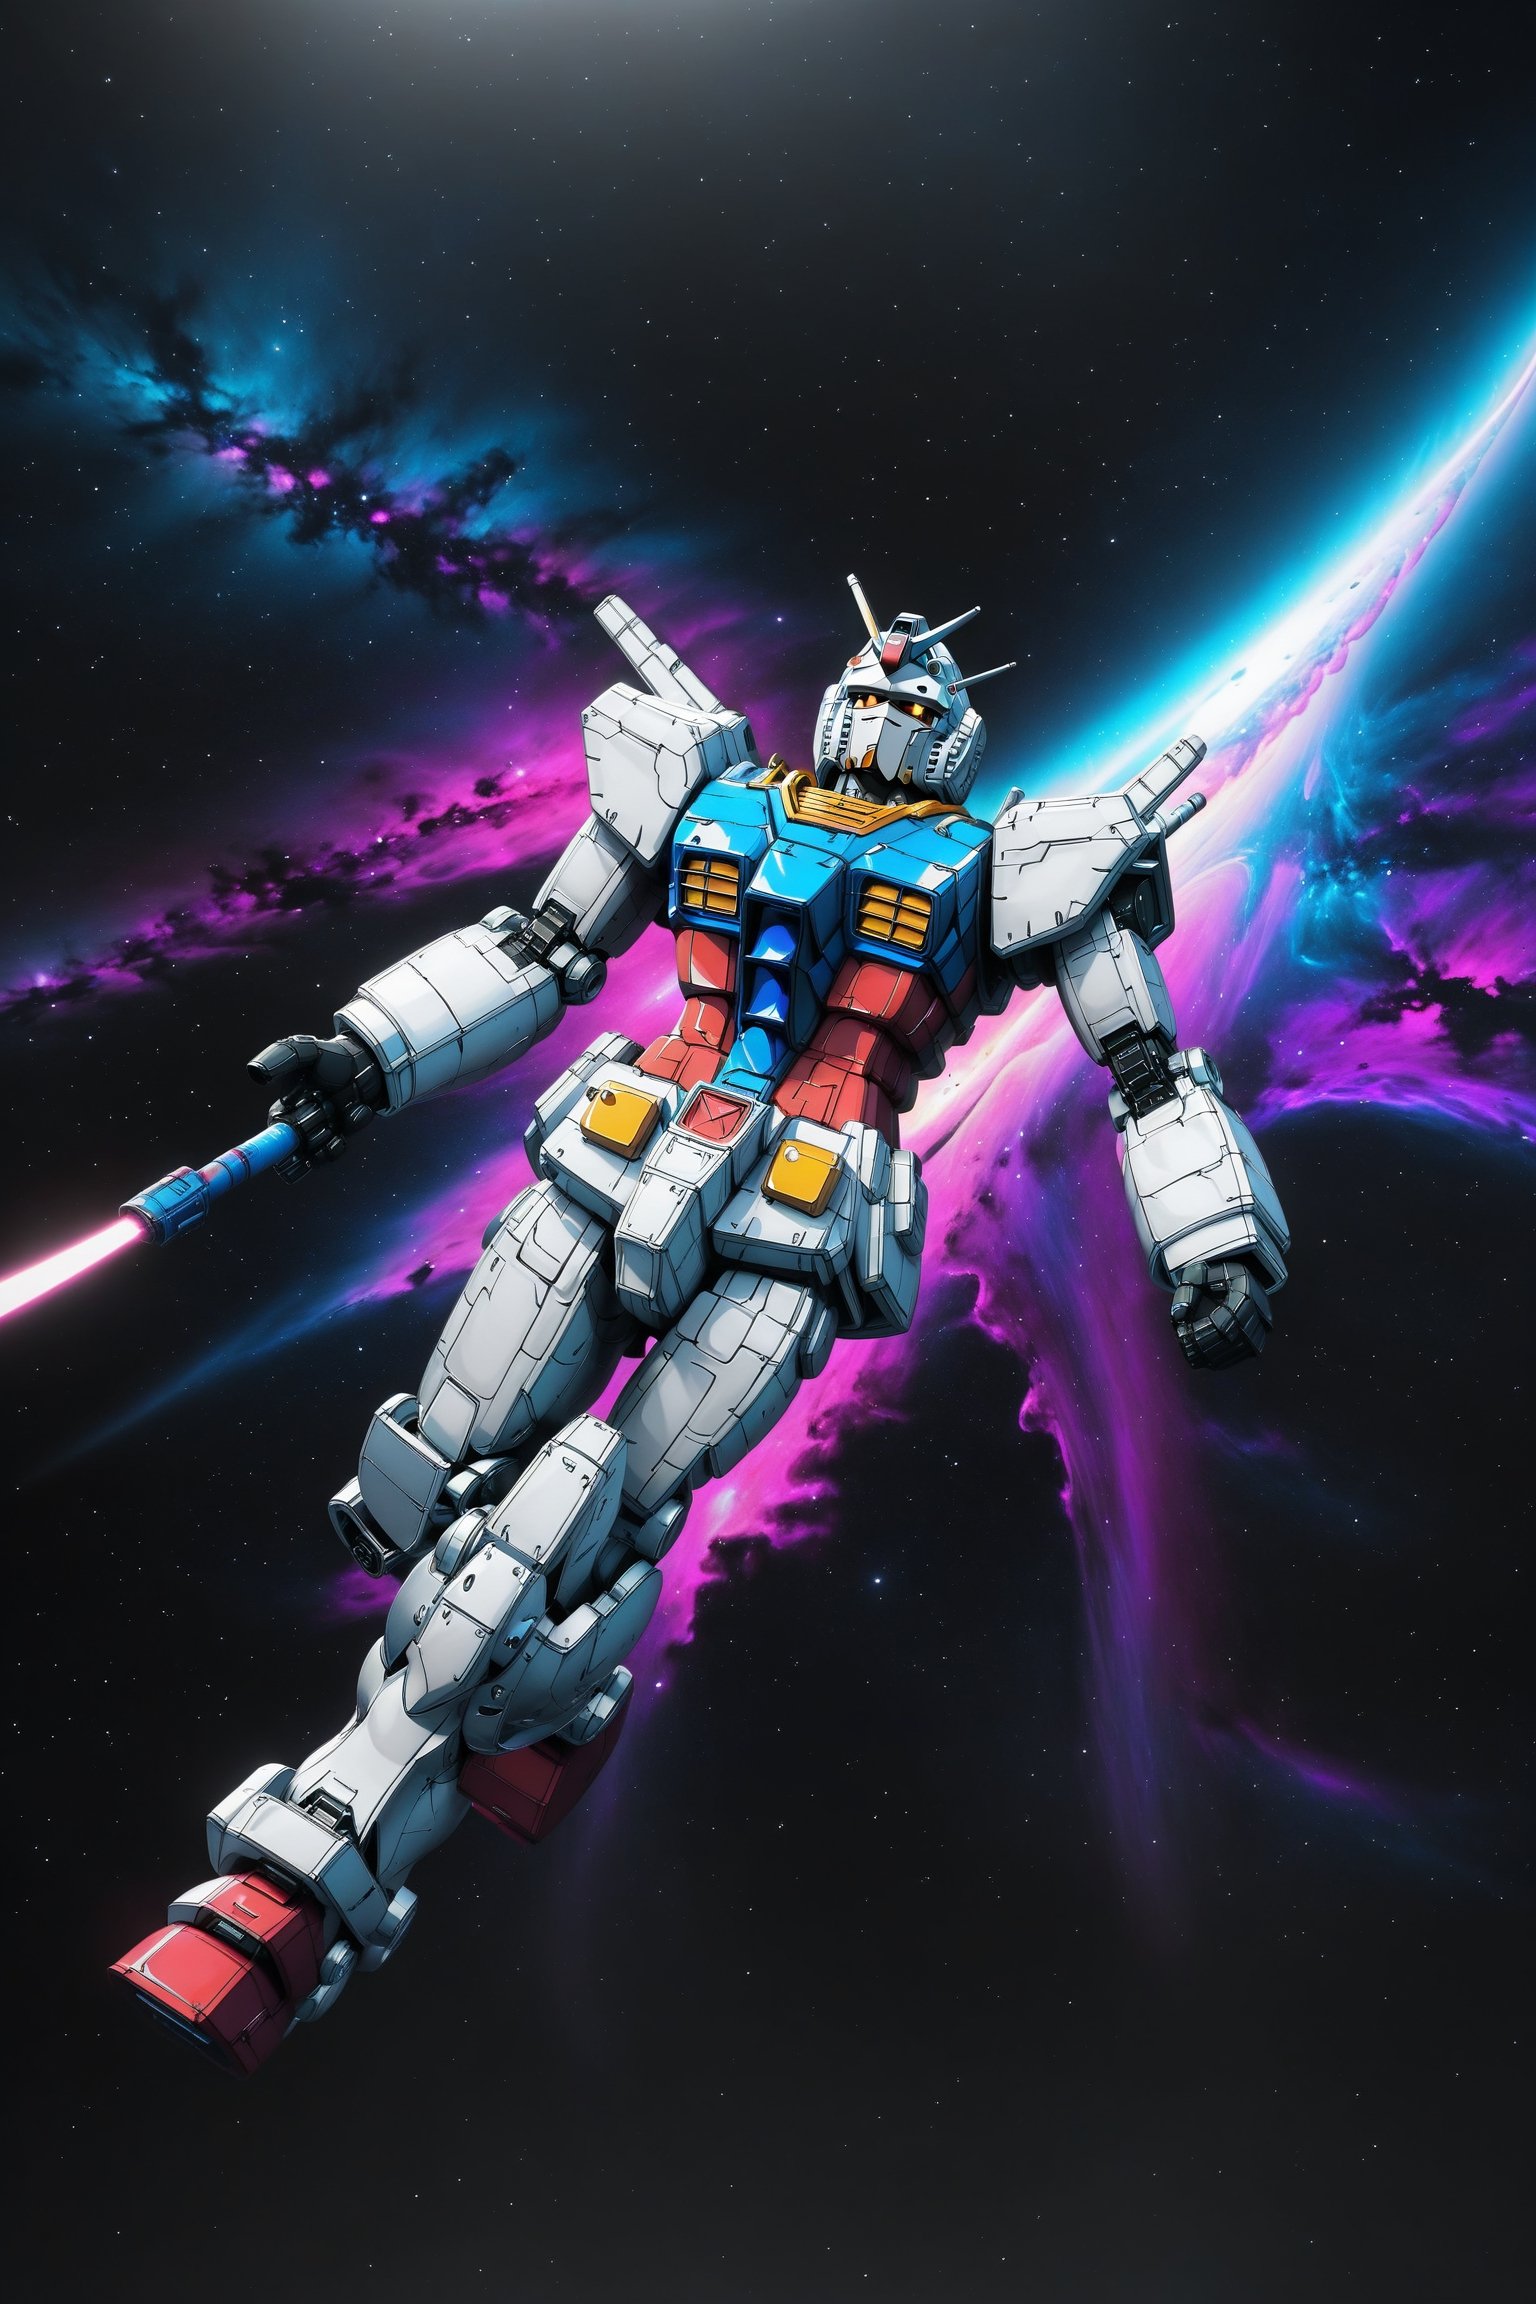 Hyper realistic, closeup, Gundam flying through space, realistic matte and glossy metal textures, background of black swirling night's sky with stars planets and galaxies, beam.sword, shield,vaporwave aesthetic,purple cyan magenta,digital artwork by Beksinski, 